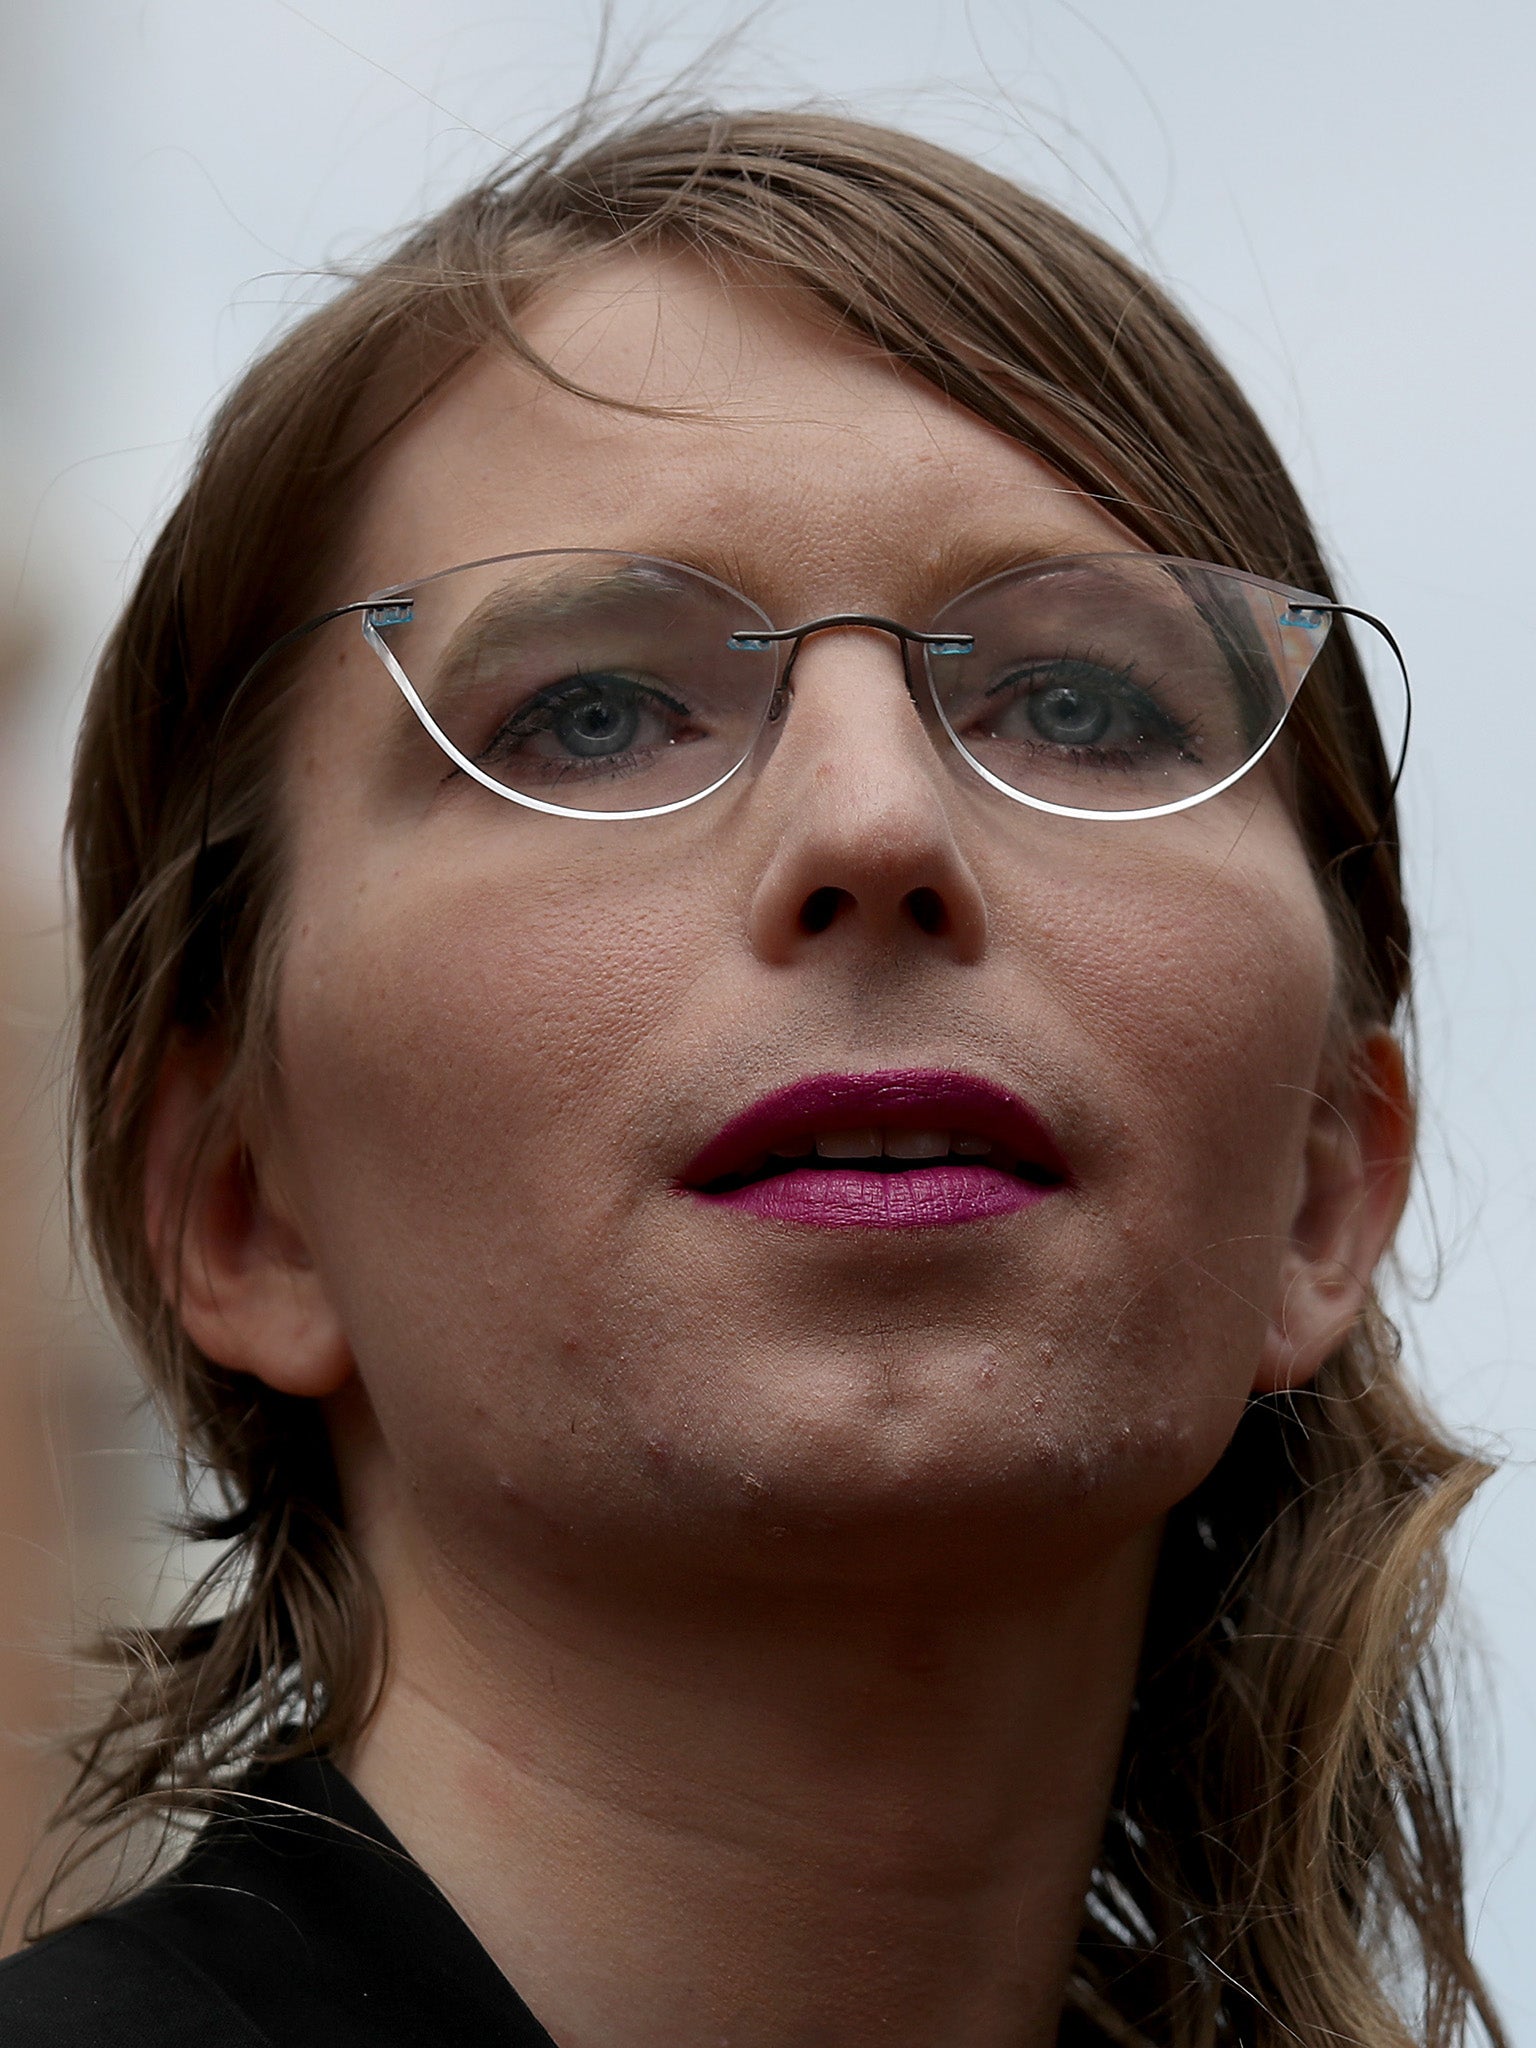 Assange is accused of supporting Chelsea Manning to obtain classified documents for WikiLeaks